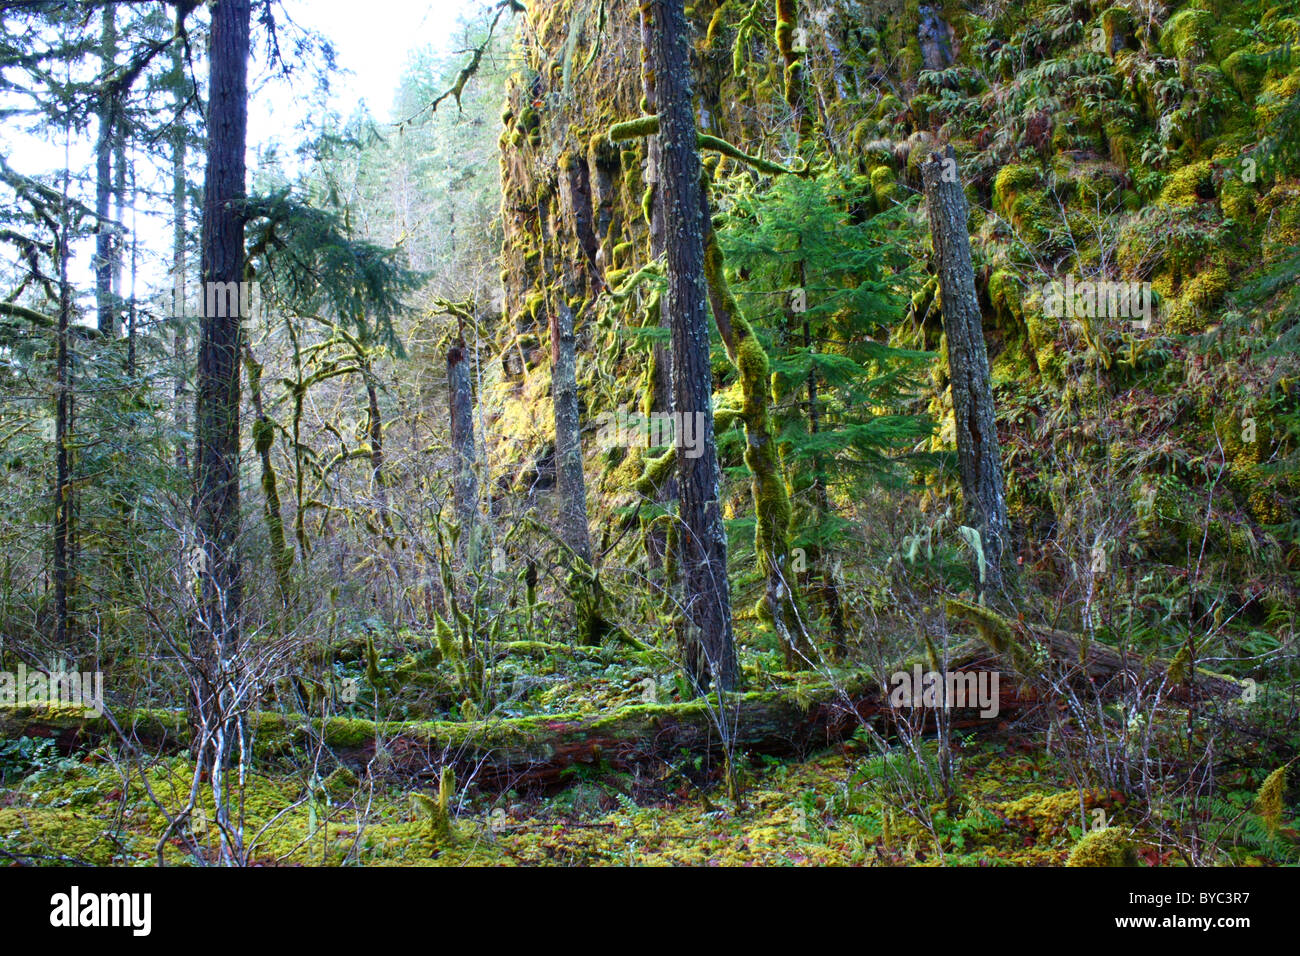 Conifer forest understory and a steep moss covered basalt cliff, with lush green moss also growing on a dead log and the ground. Stock Photo